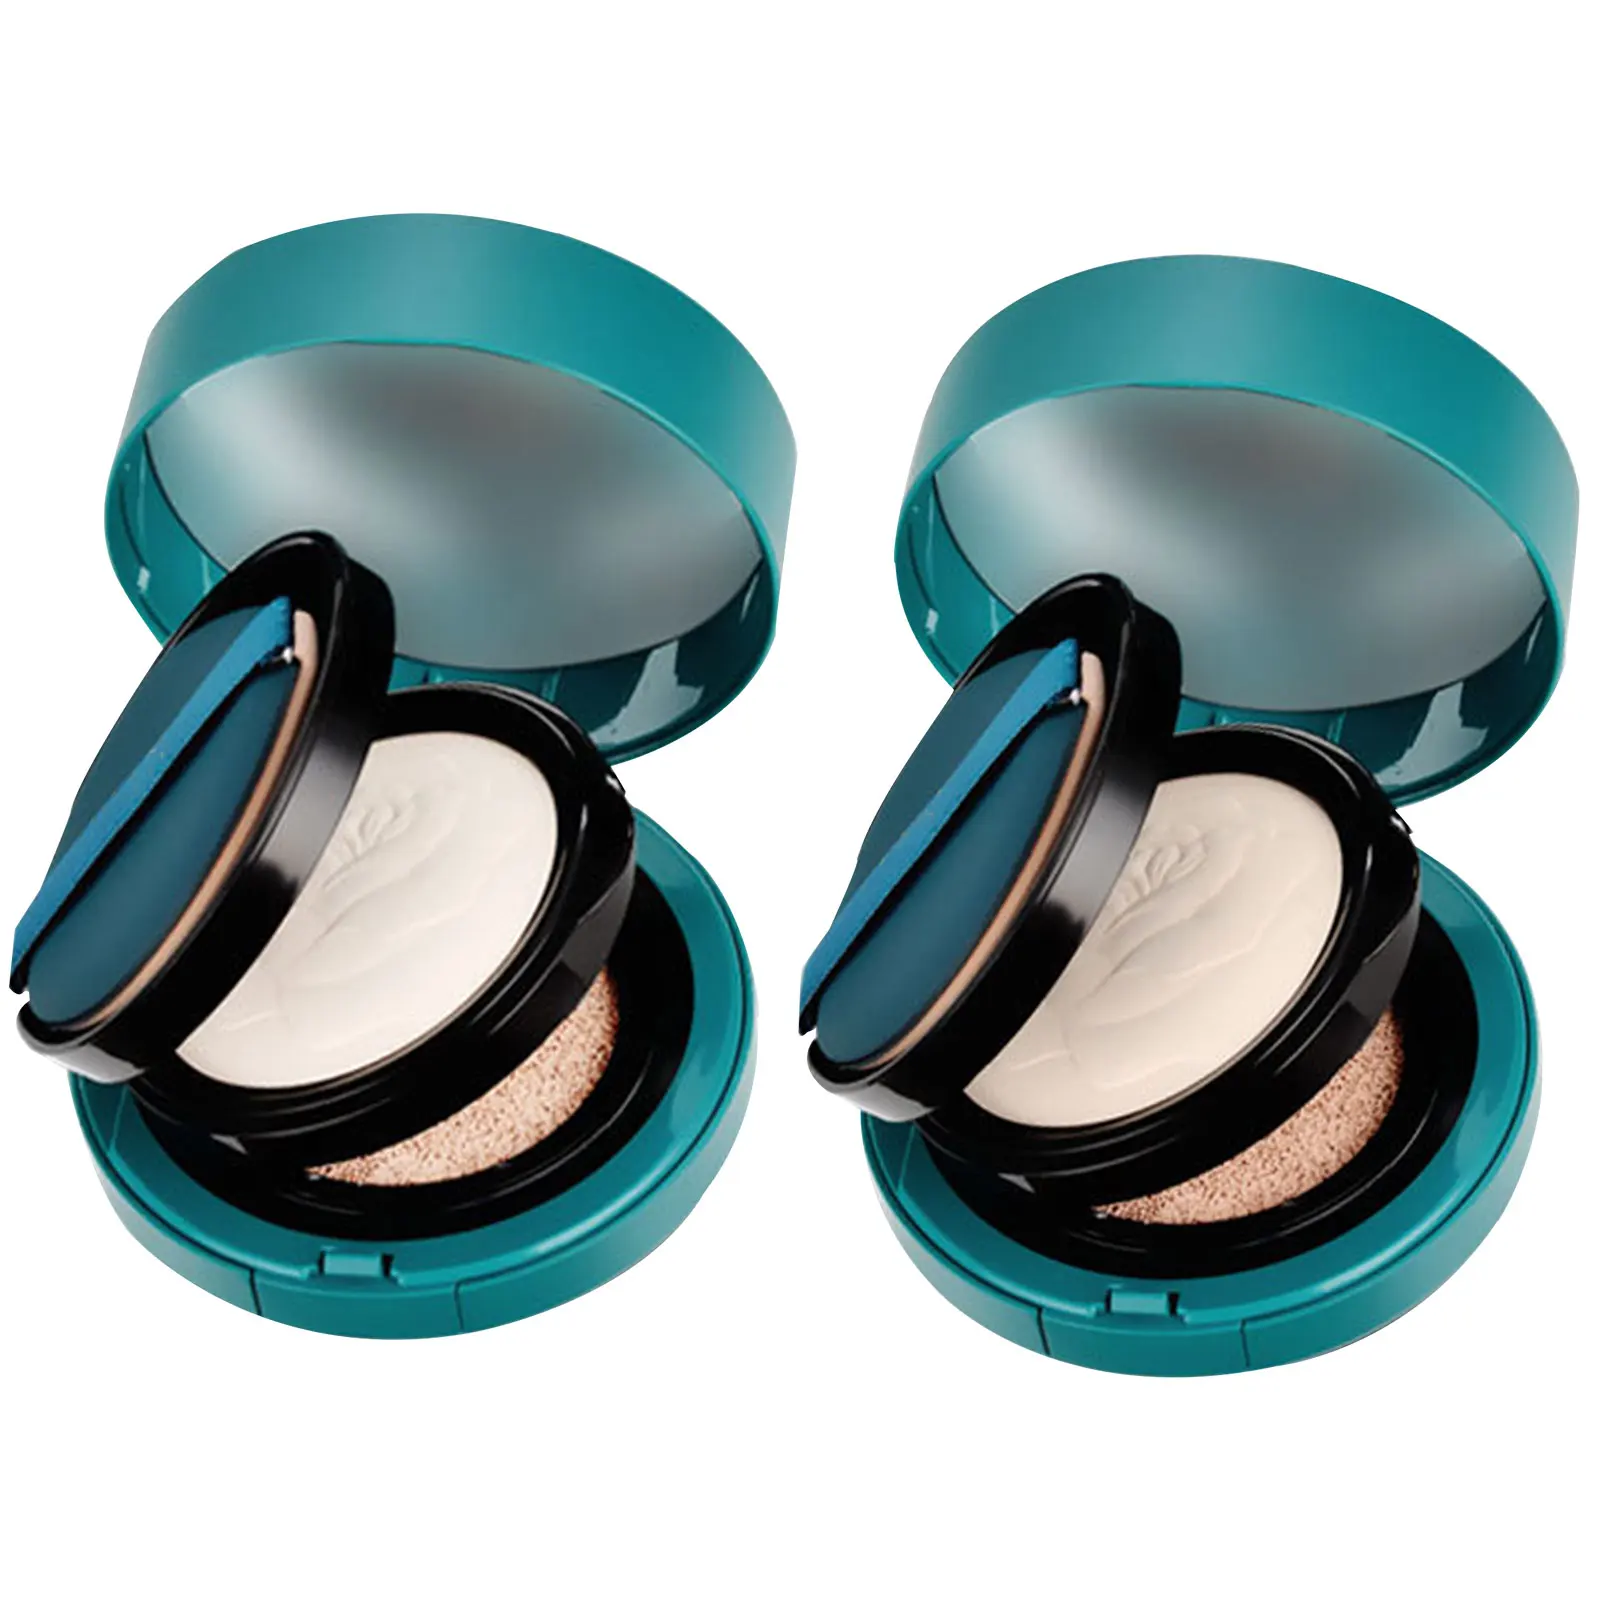 

Compact Powder For Oily Skin Double Layer Air Cushion BB Cream Makeup Setting Powder 2 In 1 Oil Control Concealer Makeup